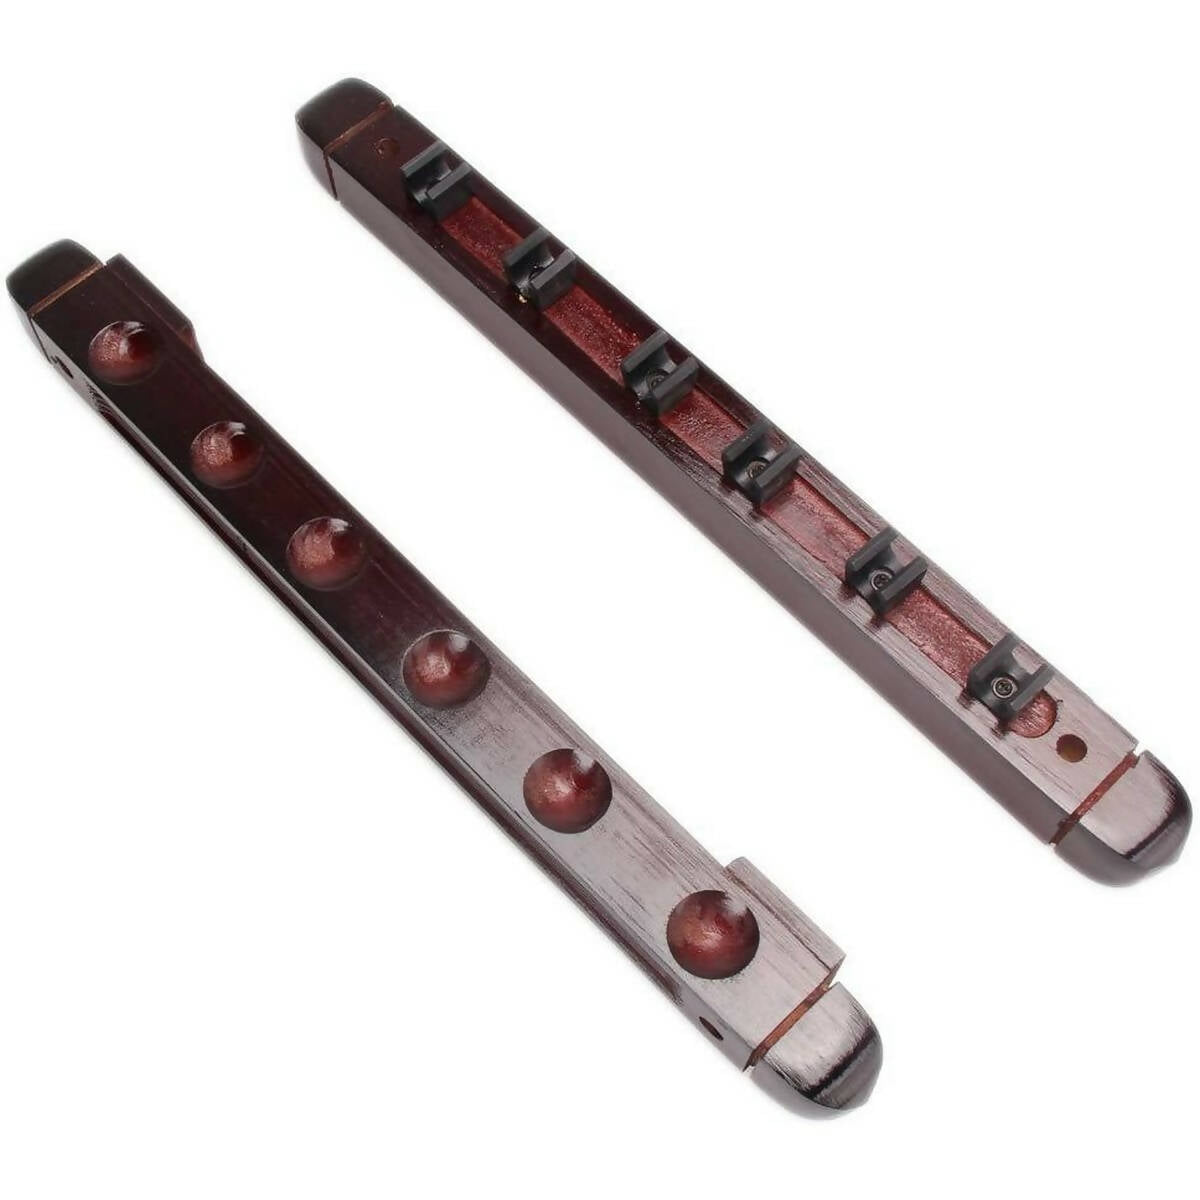 Professional Billiard Pool Wall Mount Hanging 6 Cue Sticks Holder for Snooker Red Brown